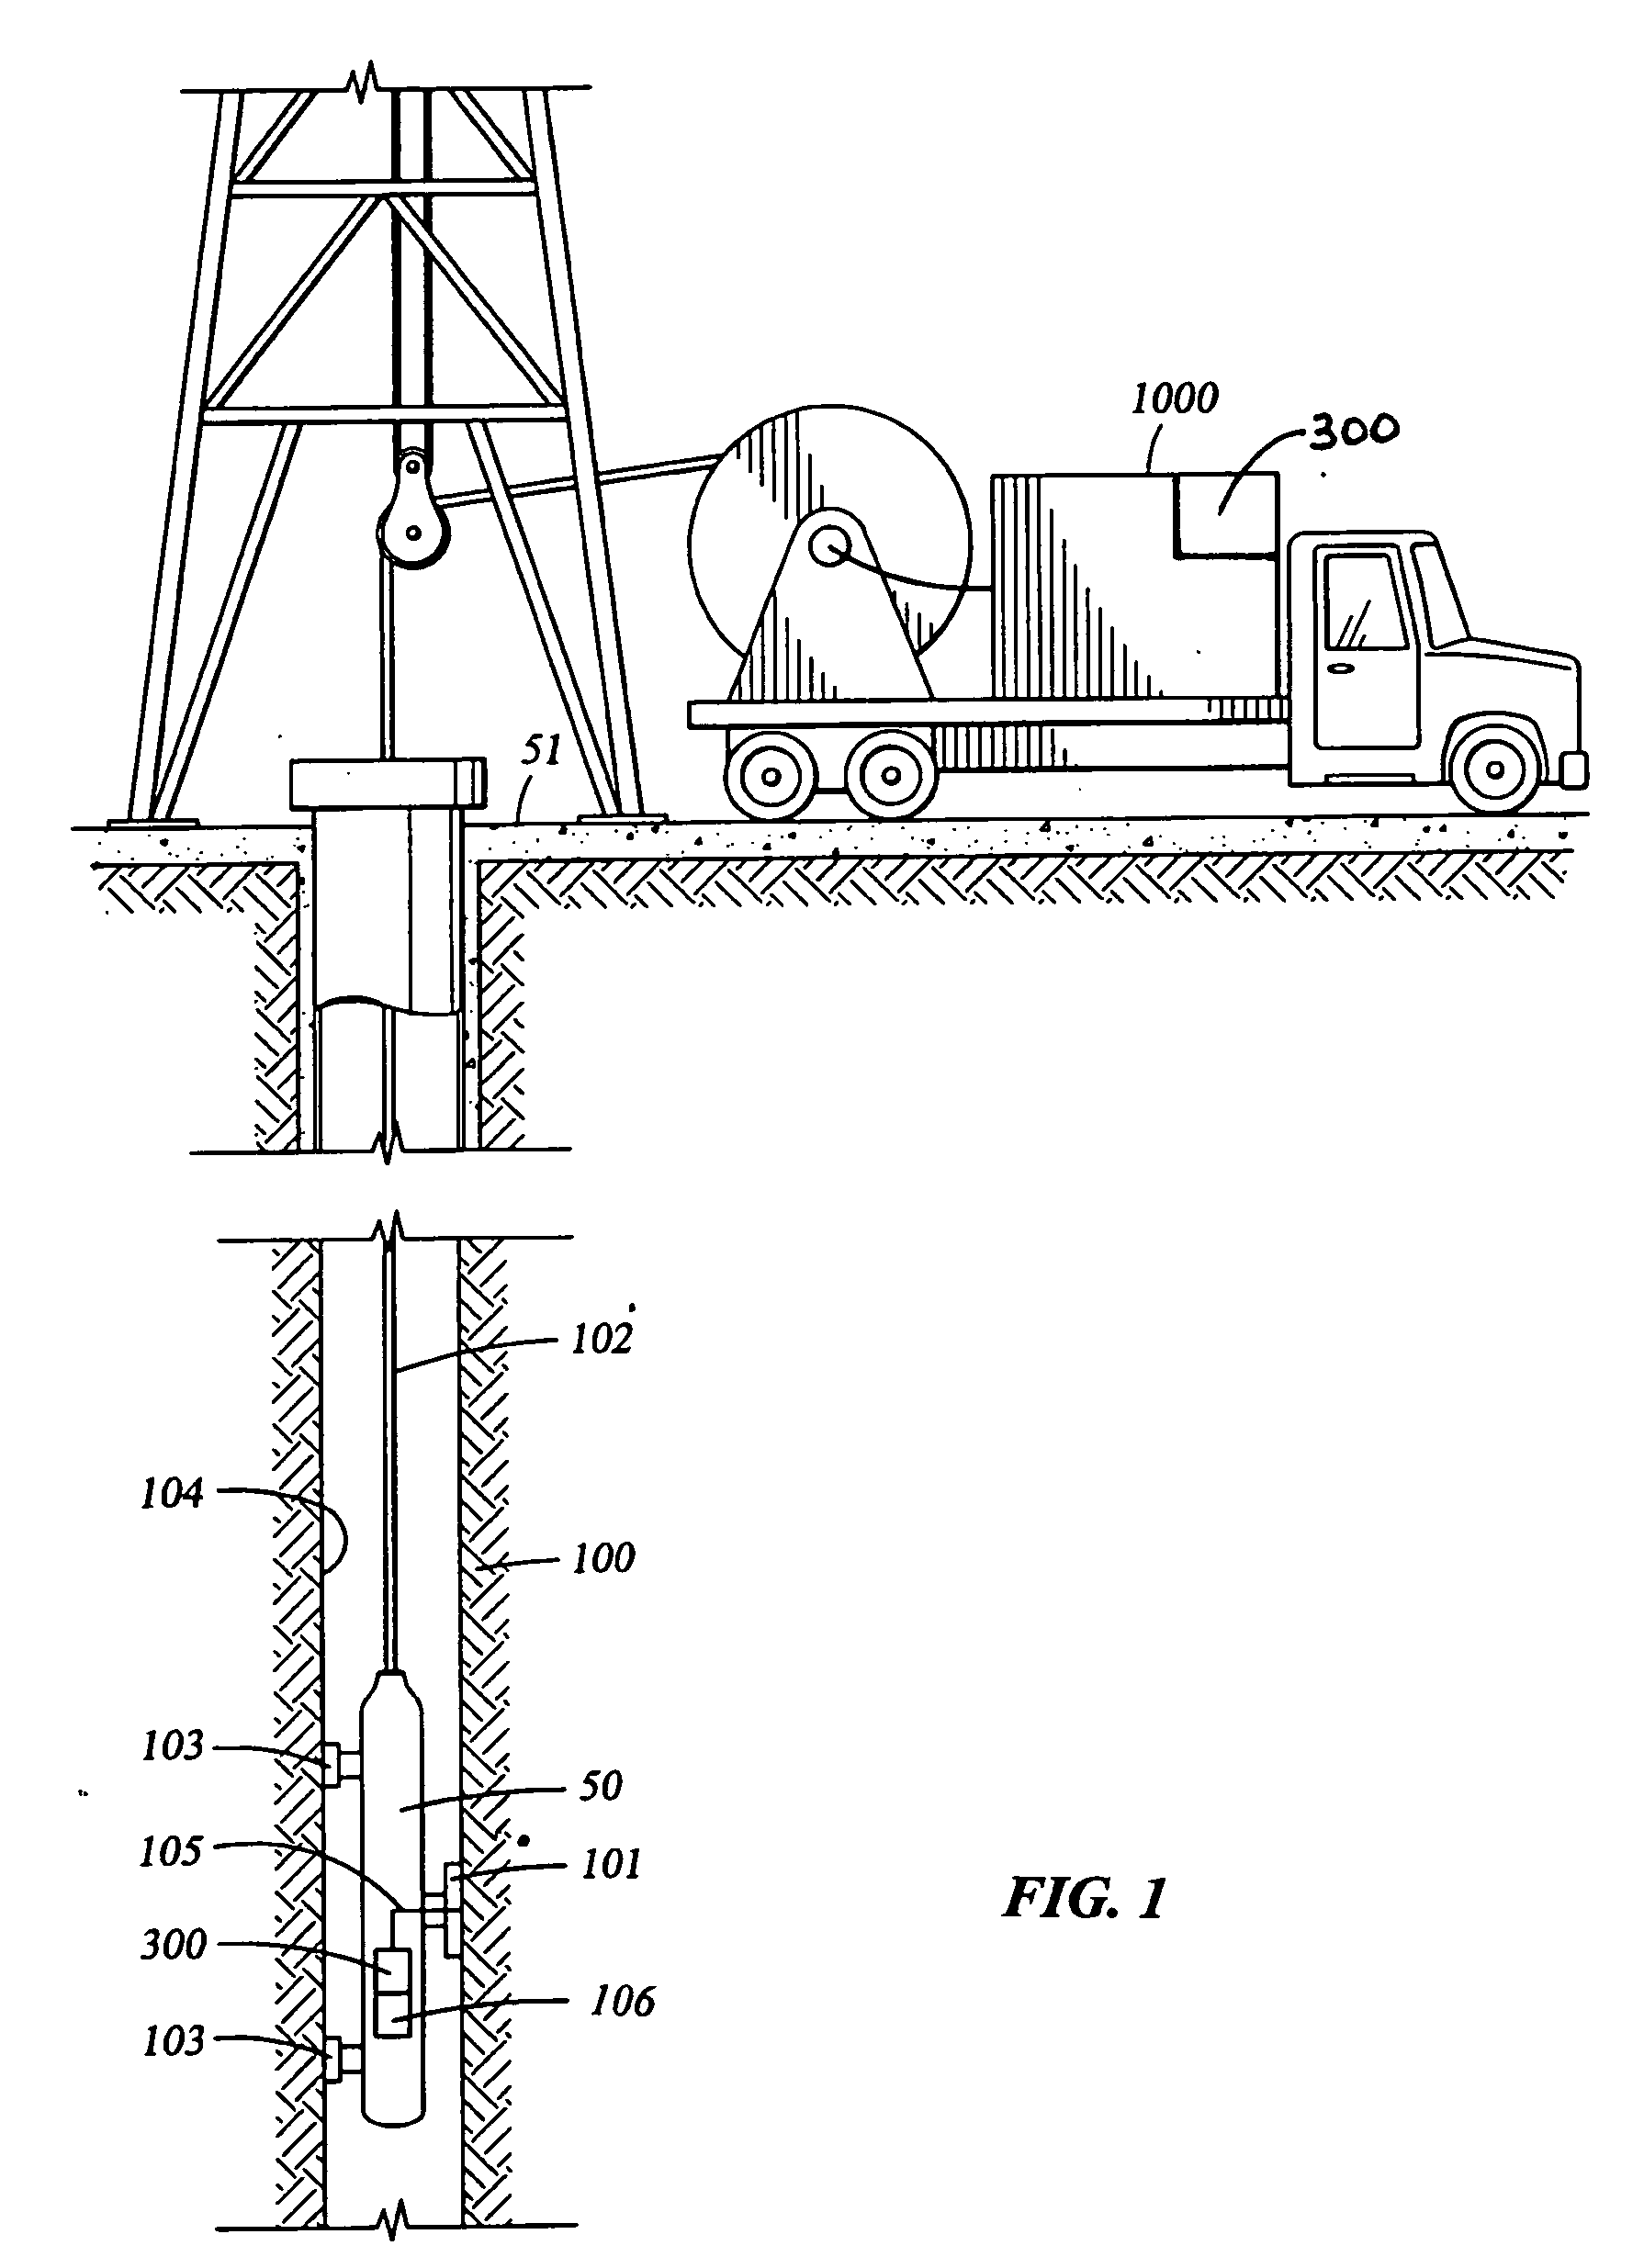 Method and apparatus for reservoir characterization using photoacoustic spectroscopy